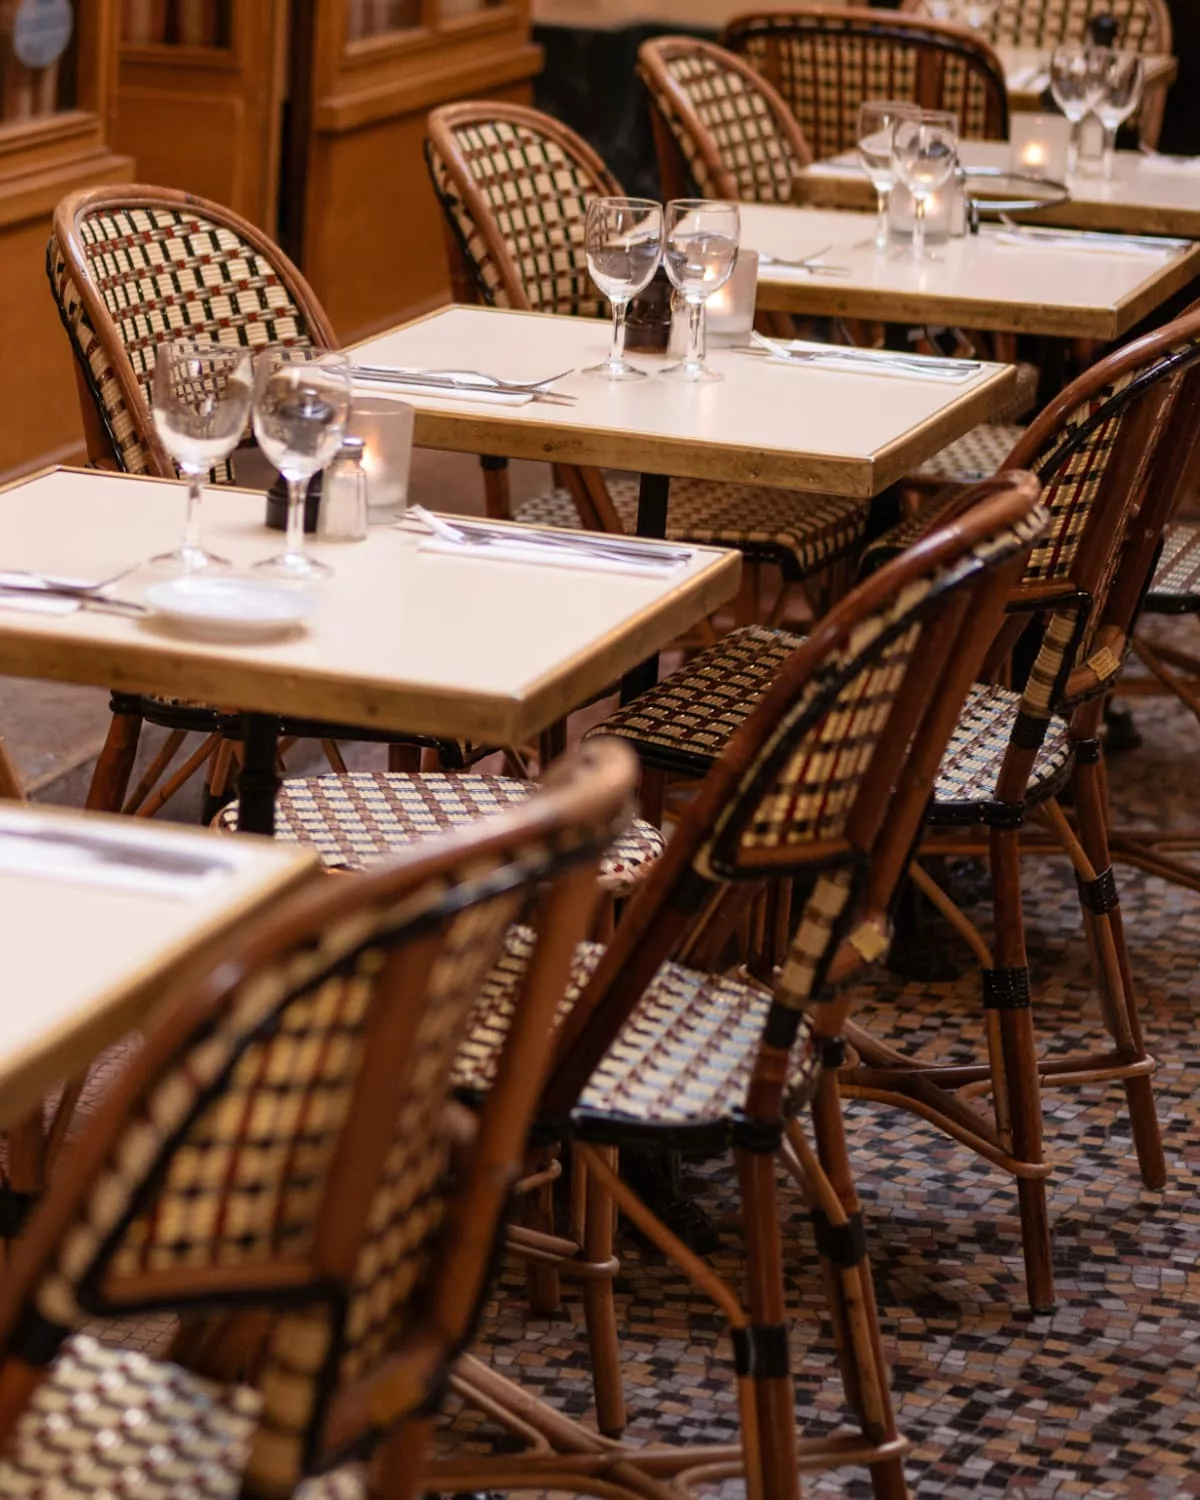 Cafe chairs and dressed tables ready for dinner service